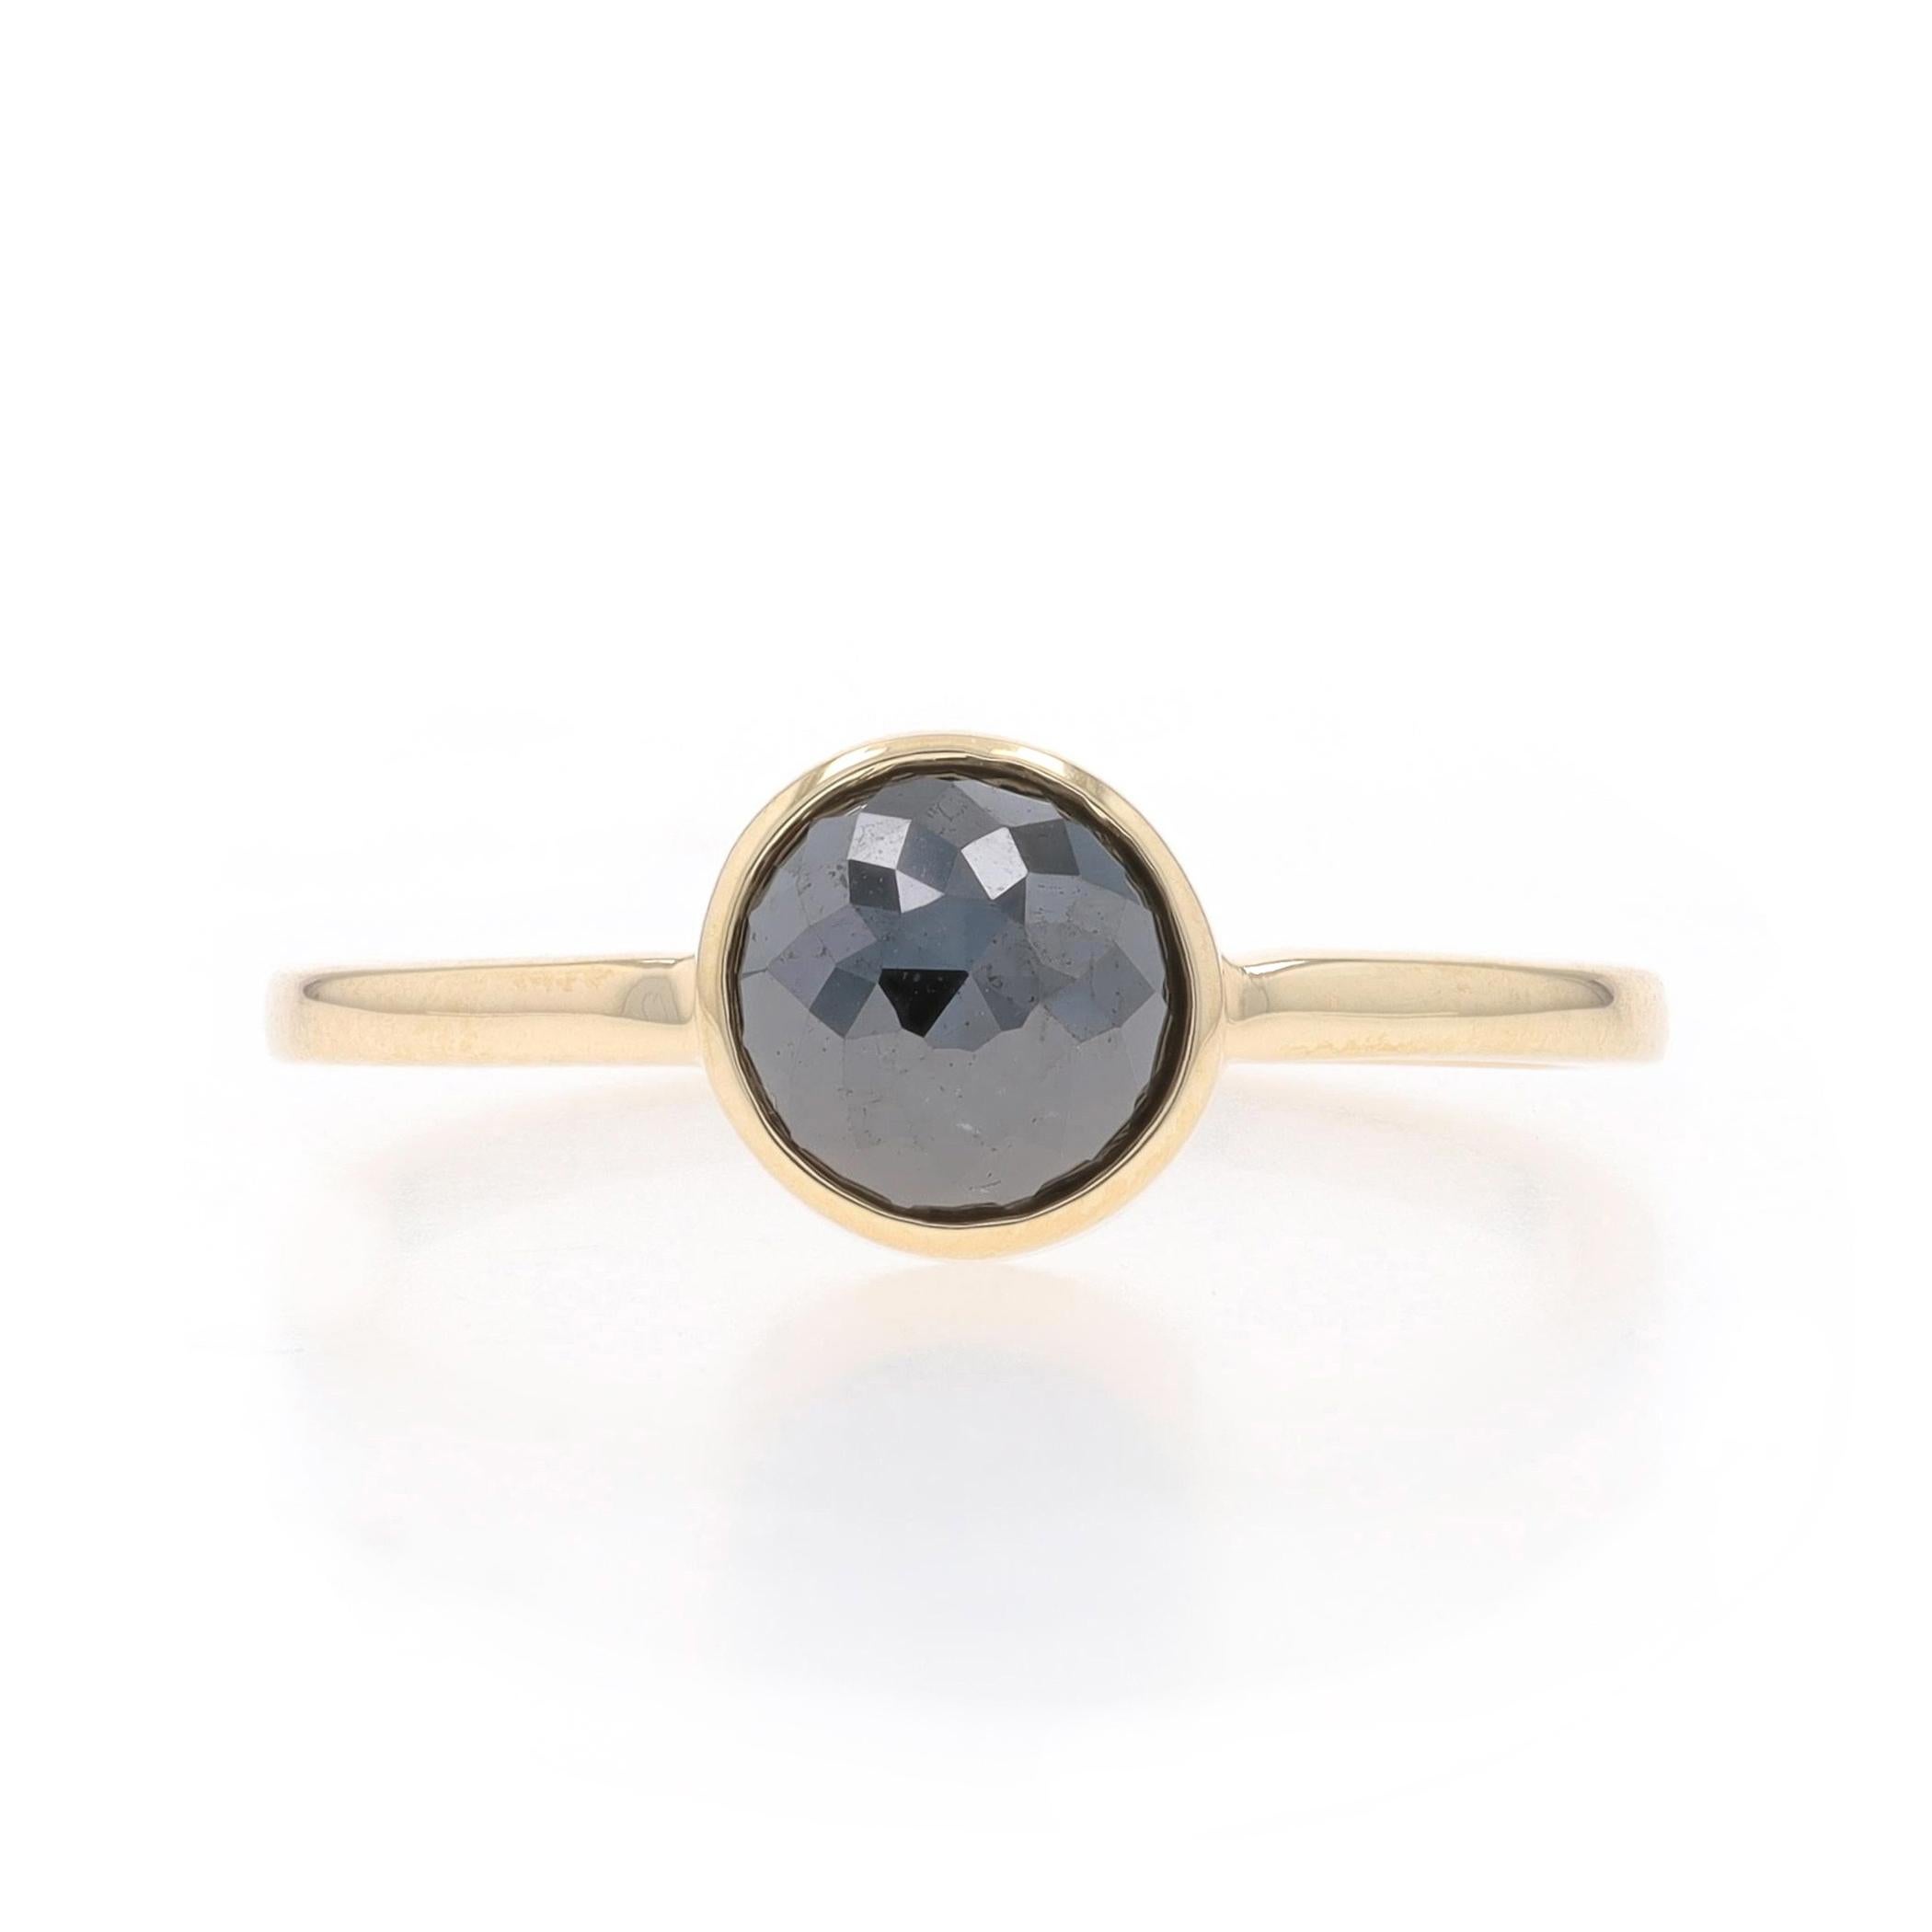 Size: 8 1/4
Sizing Fee: Up 3 sizes for $35 or Down 3 sizes for $35

Metal Content: 14k Yellow Gold

Stone Information
Natural Diamond
Treatment: Color Enhanced
Carat(s): 1.00ct
Cut: Rose
Color: Black

Total Carats: 1.00ct

Style: Solitaire
Features: